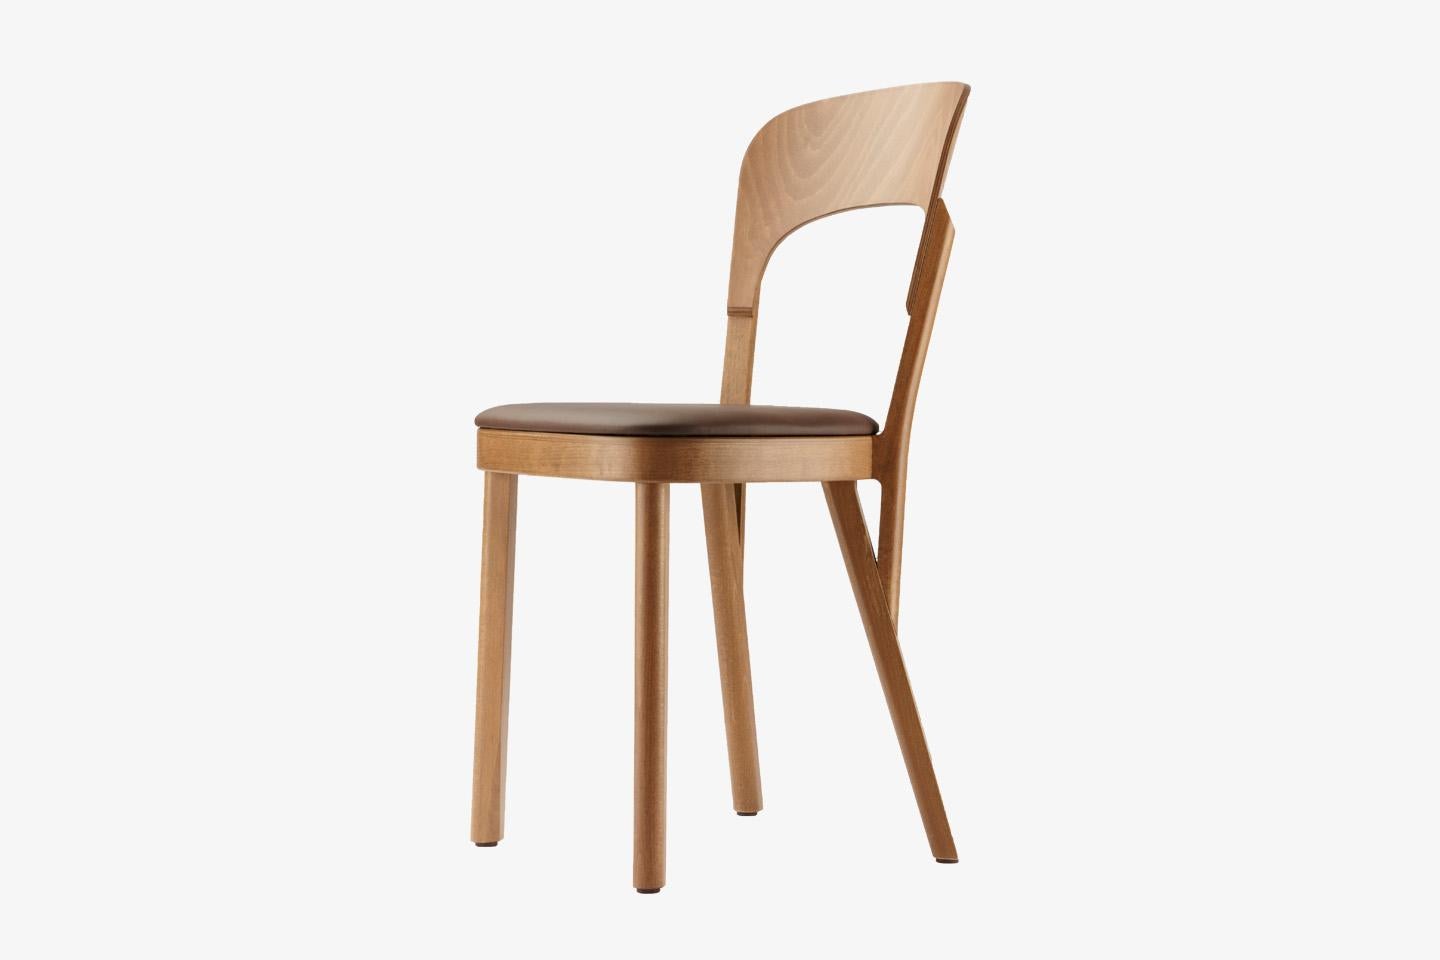 RANGE 107
It's a feast for the eyes: the 107 chair is particularly suited for use in restaurants and cafés, thanks to an excellent combination of elegance, stability and lightness. With its simple form, it also lends itself perfectly for use as a